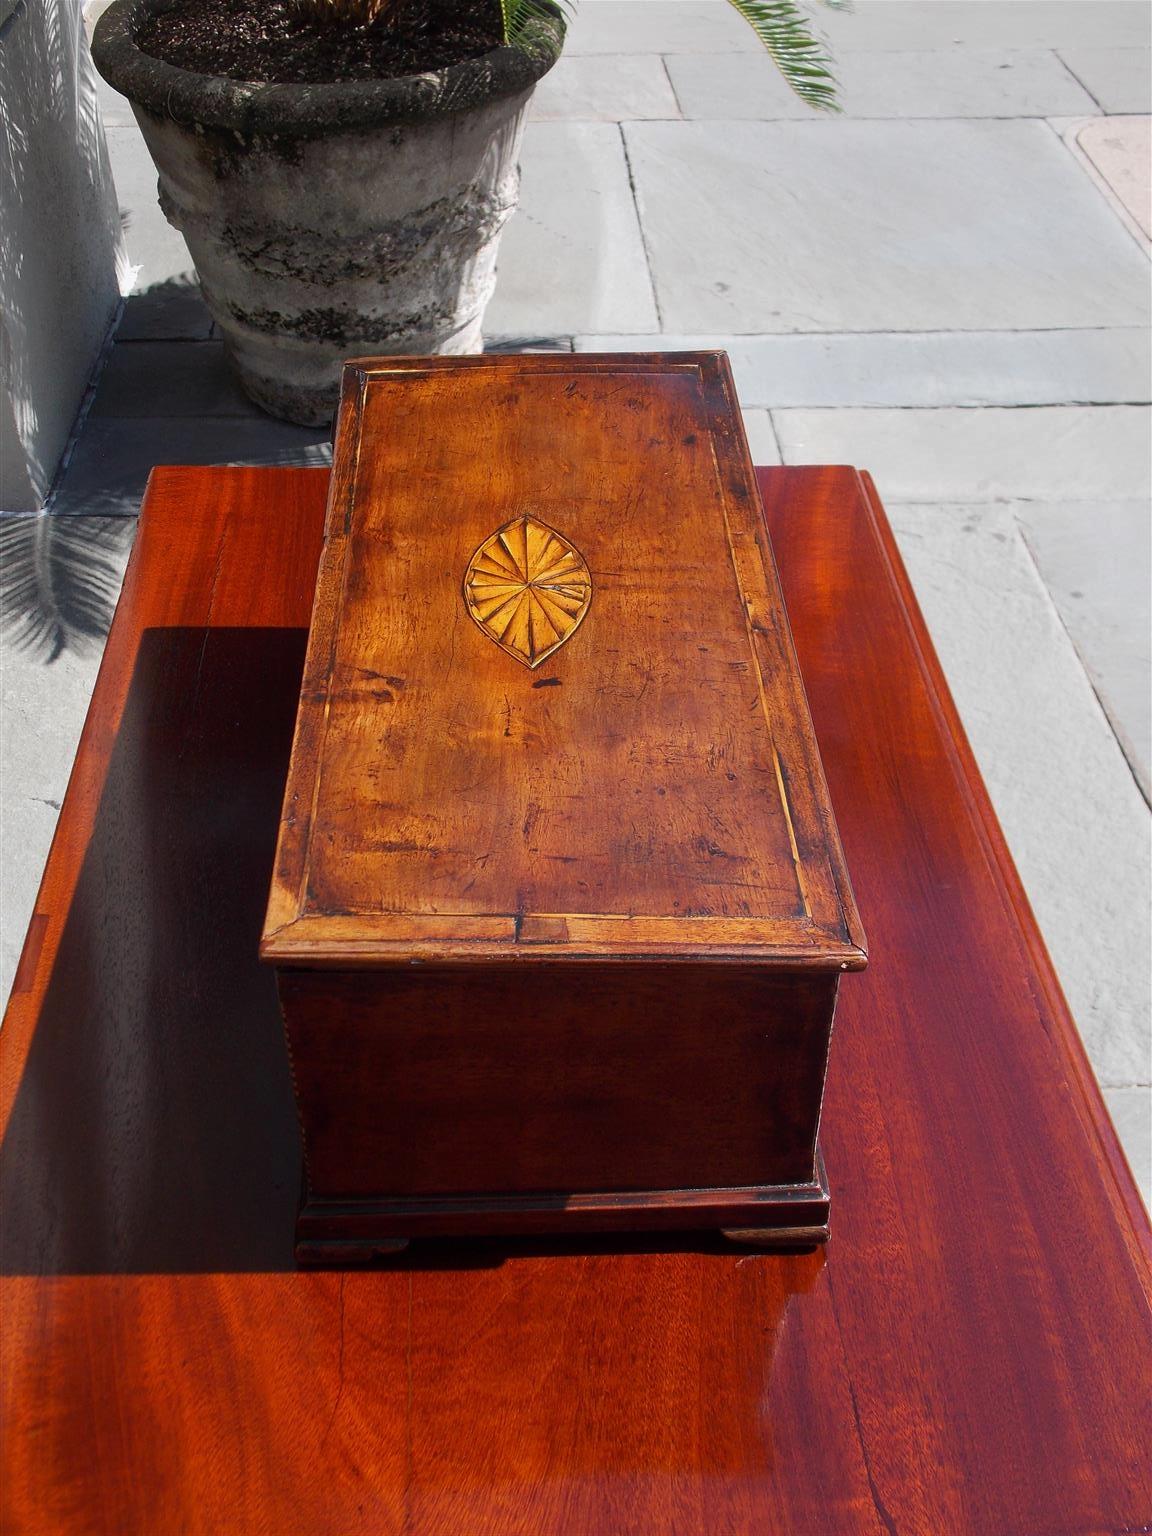 Late 18th Century American Walnut Satinwood Inlaid Valuables Box with Original Feet, Circa 1780 For Sale